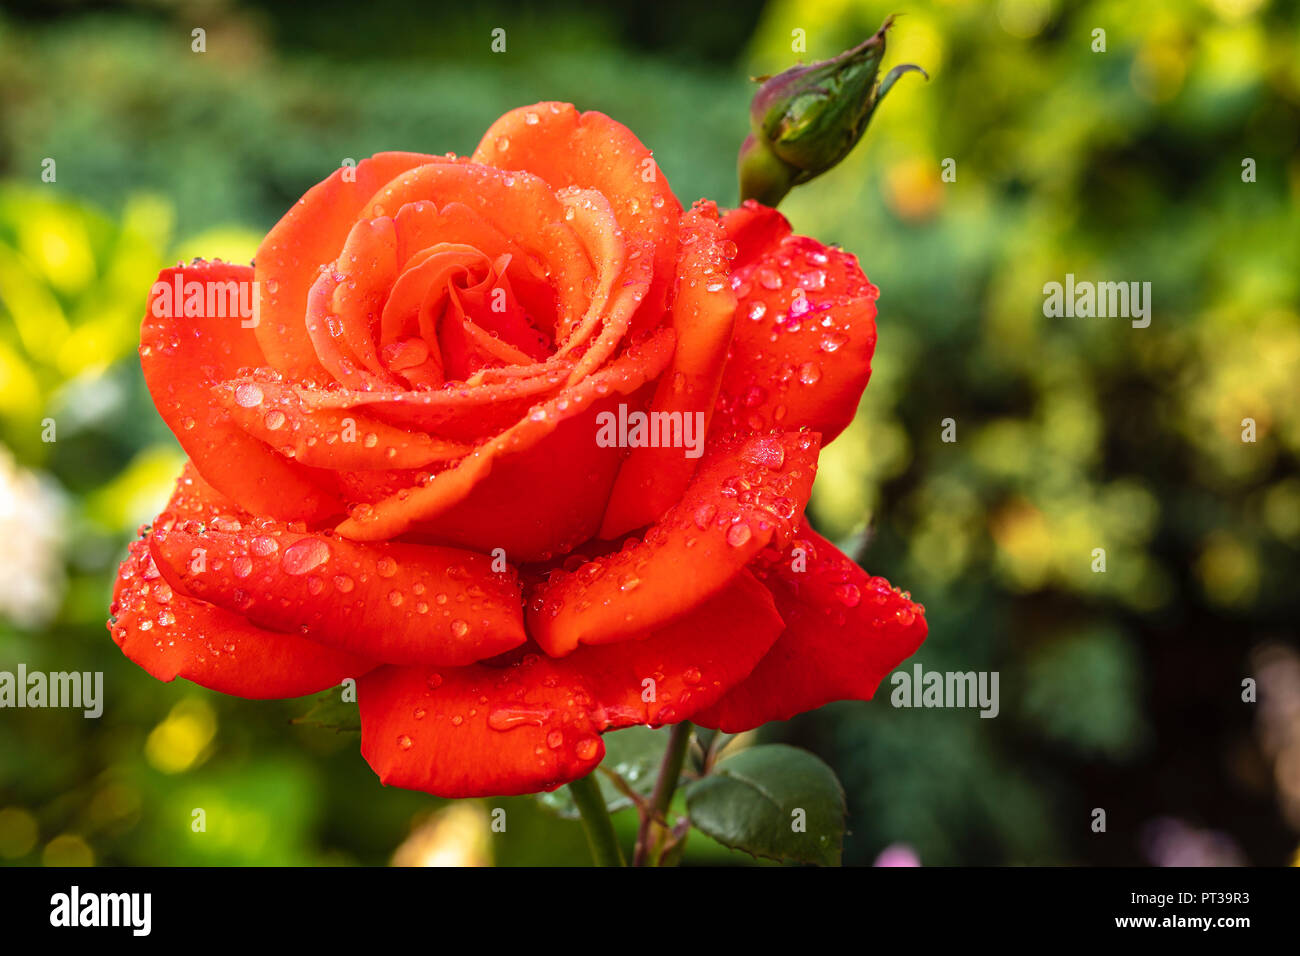 Red rose in a garden, wet, drops of water Stock Photo